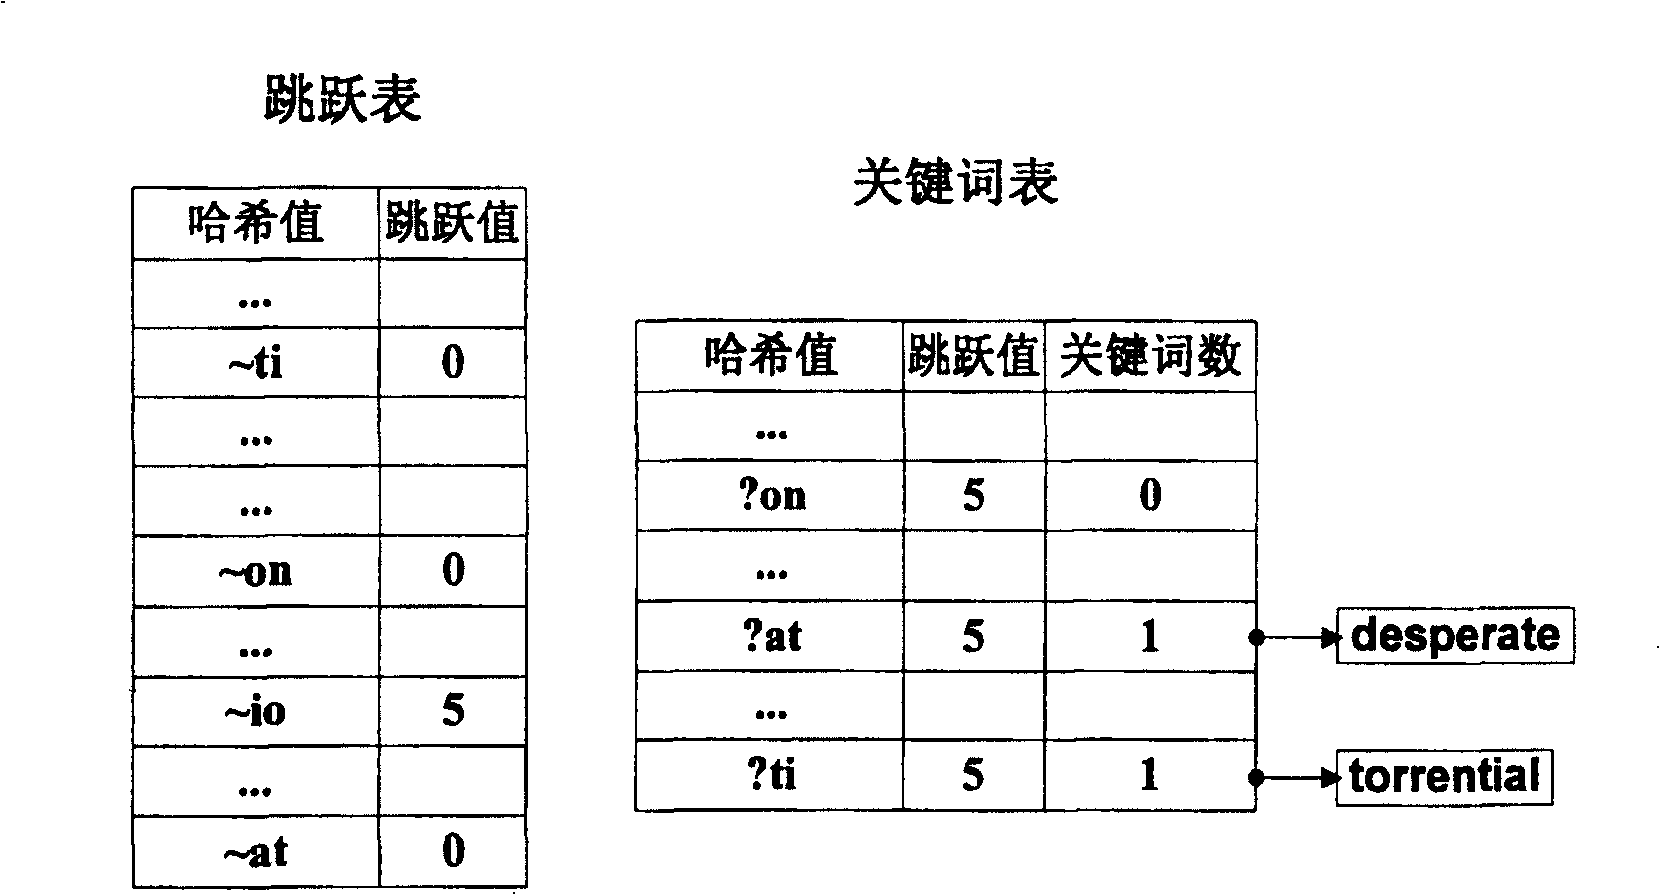 Large-scale and multi-key word matching method for text or network content analysis